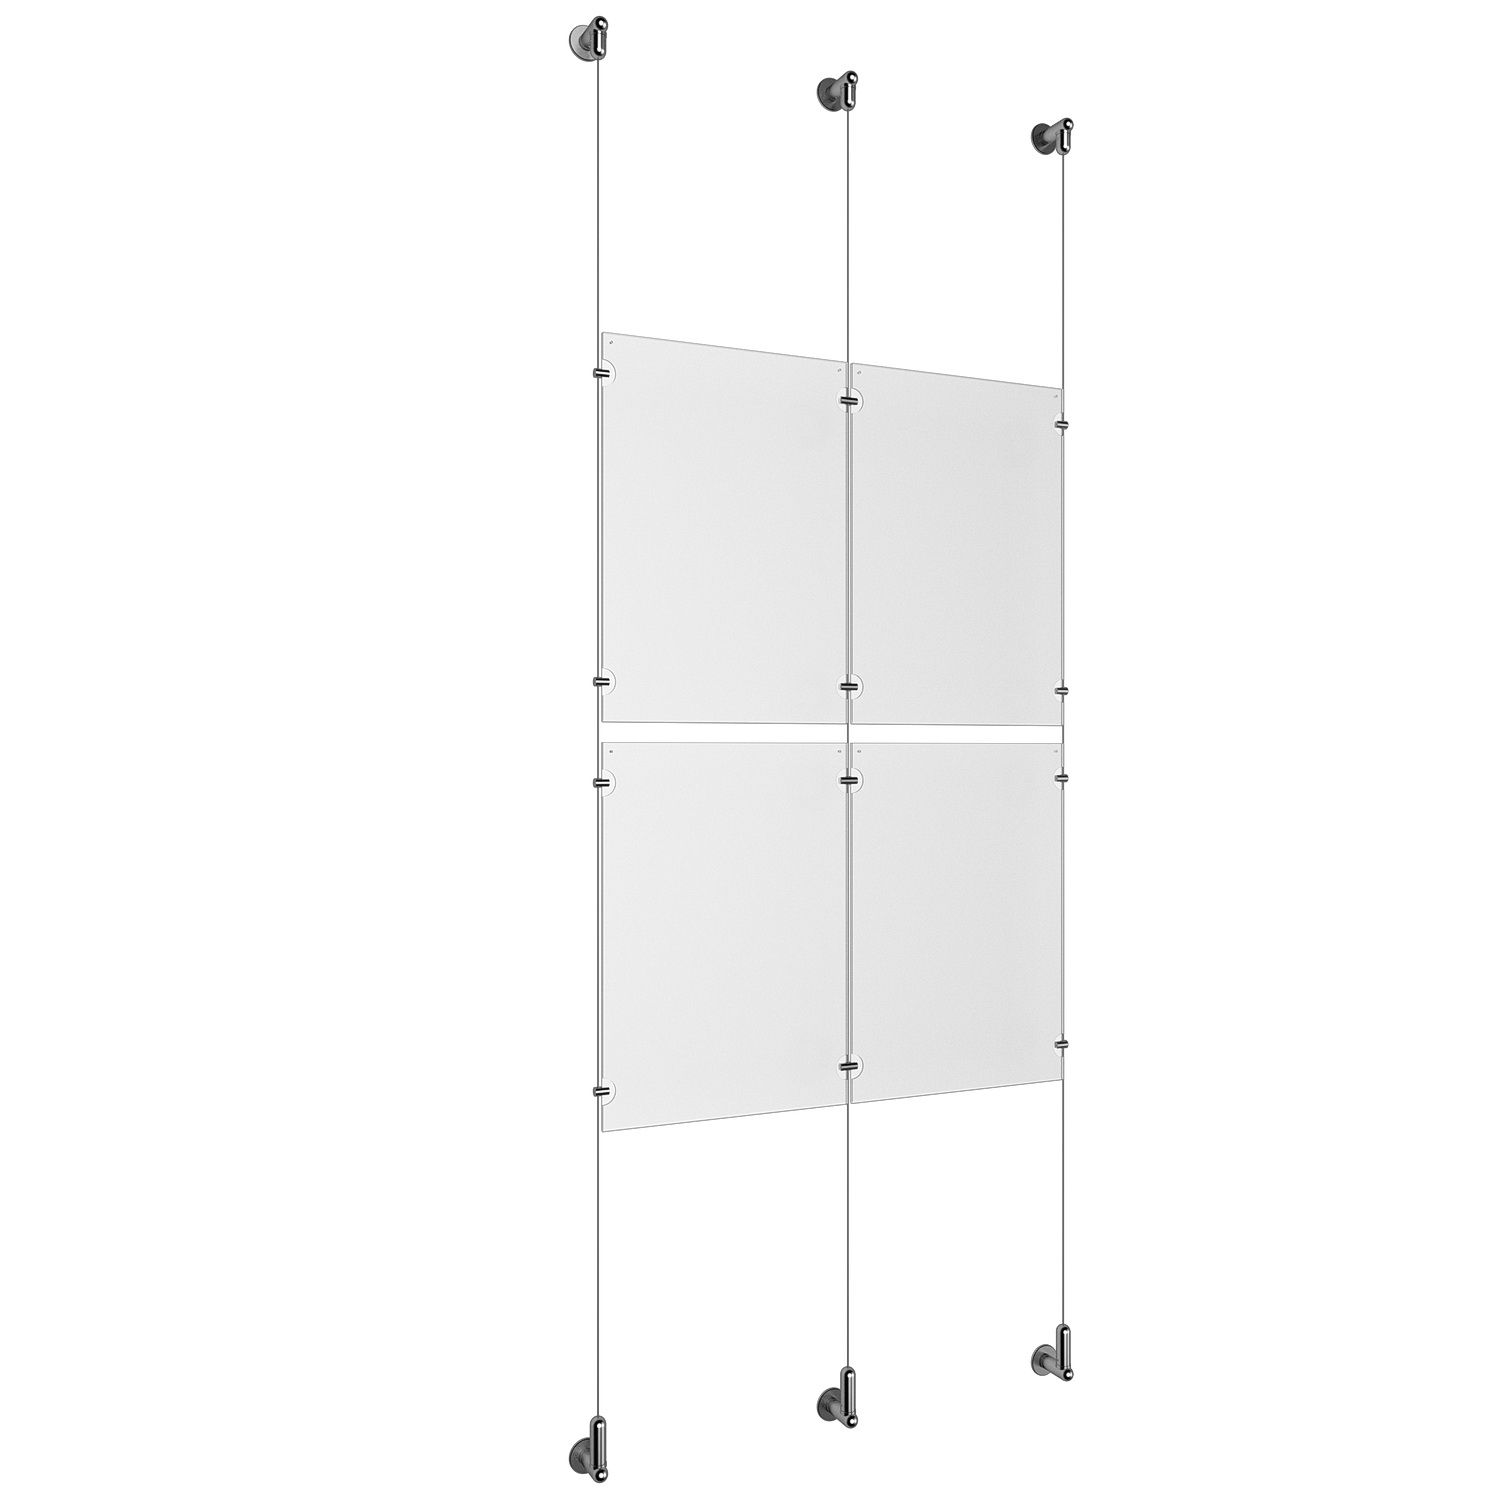 (4) 11'' Width x 17'' Height Clear Acrylic Frame & (3) Wall-to-Wall Aluminum Clear Anodized Cable Systems with (8) Single-Sided Panel Grippers (4) Double-Sided Panel Grippers